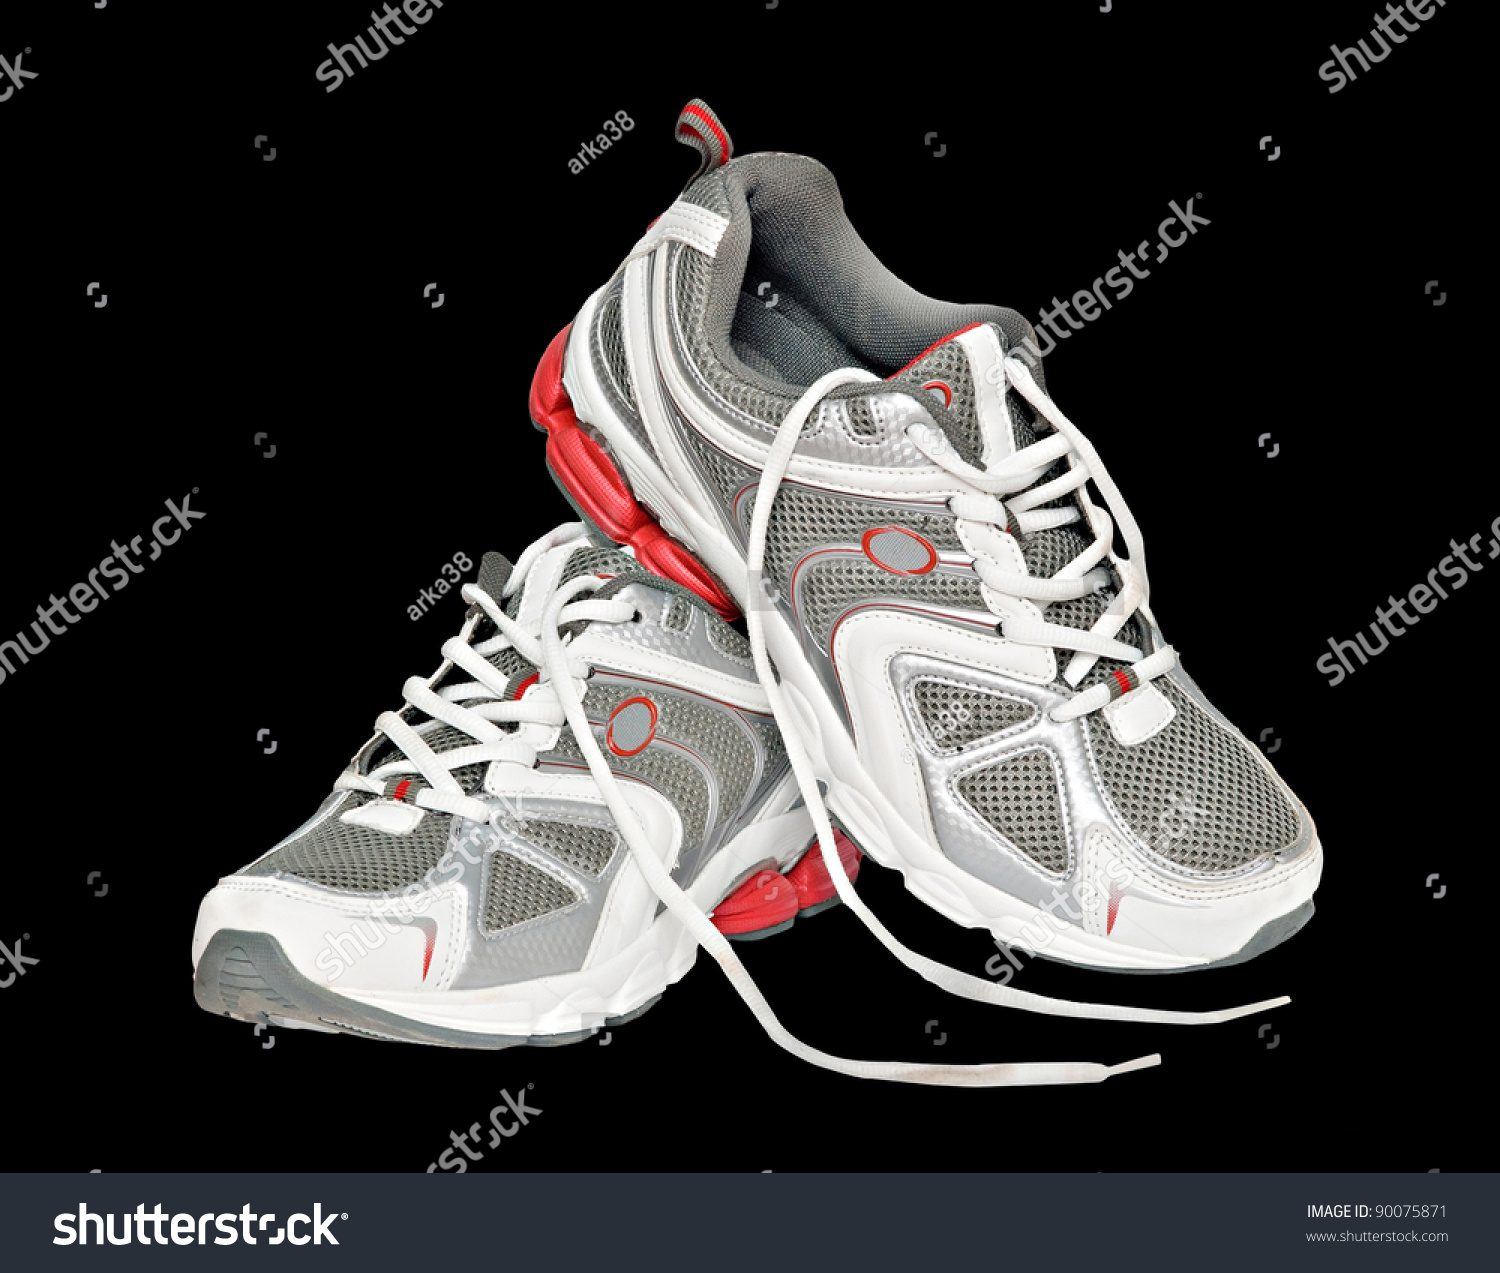 Sneakers Isolated On Black Background Stock Photo 90075871 : Shutterstock